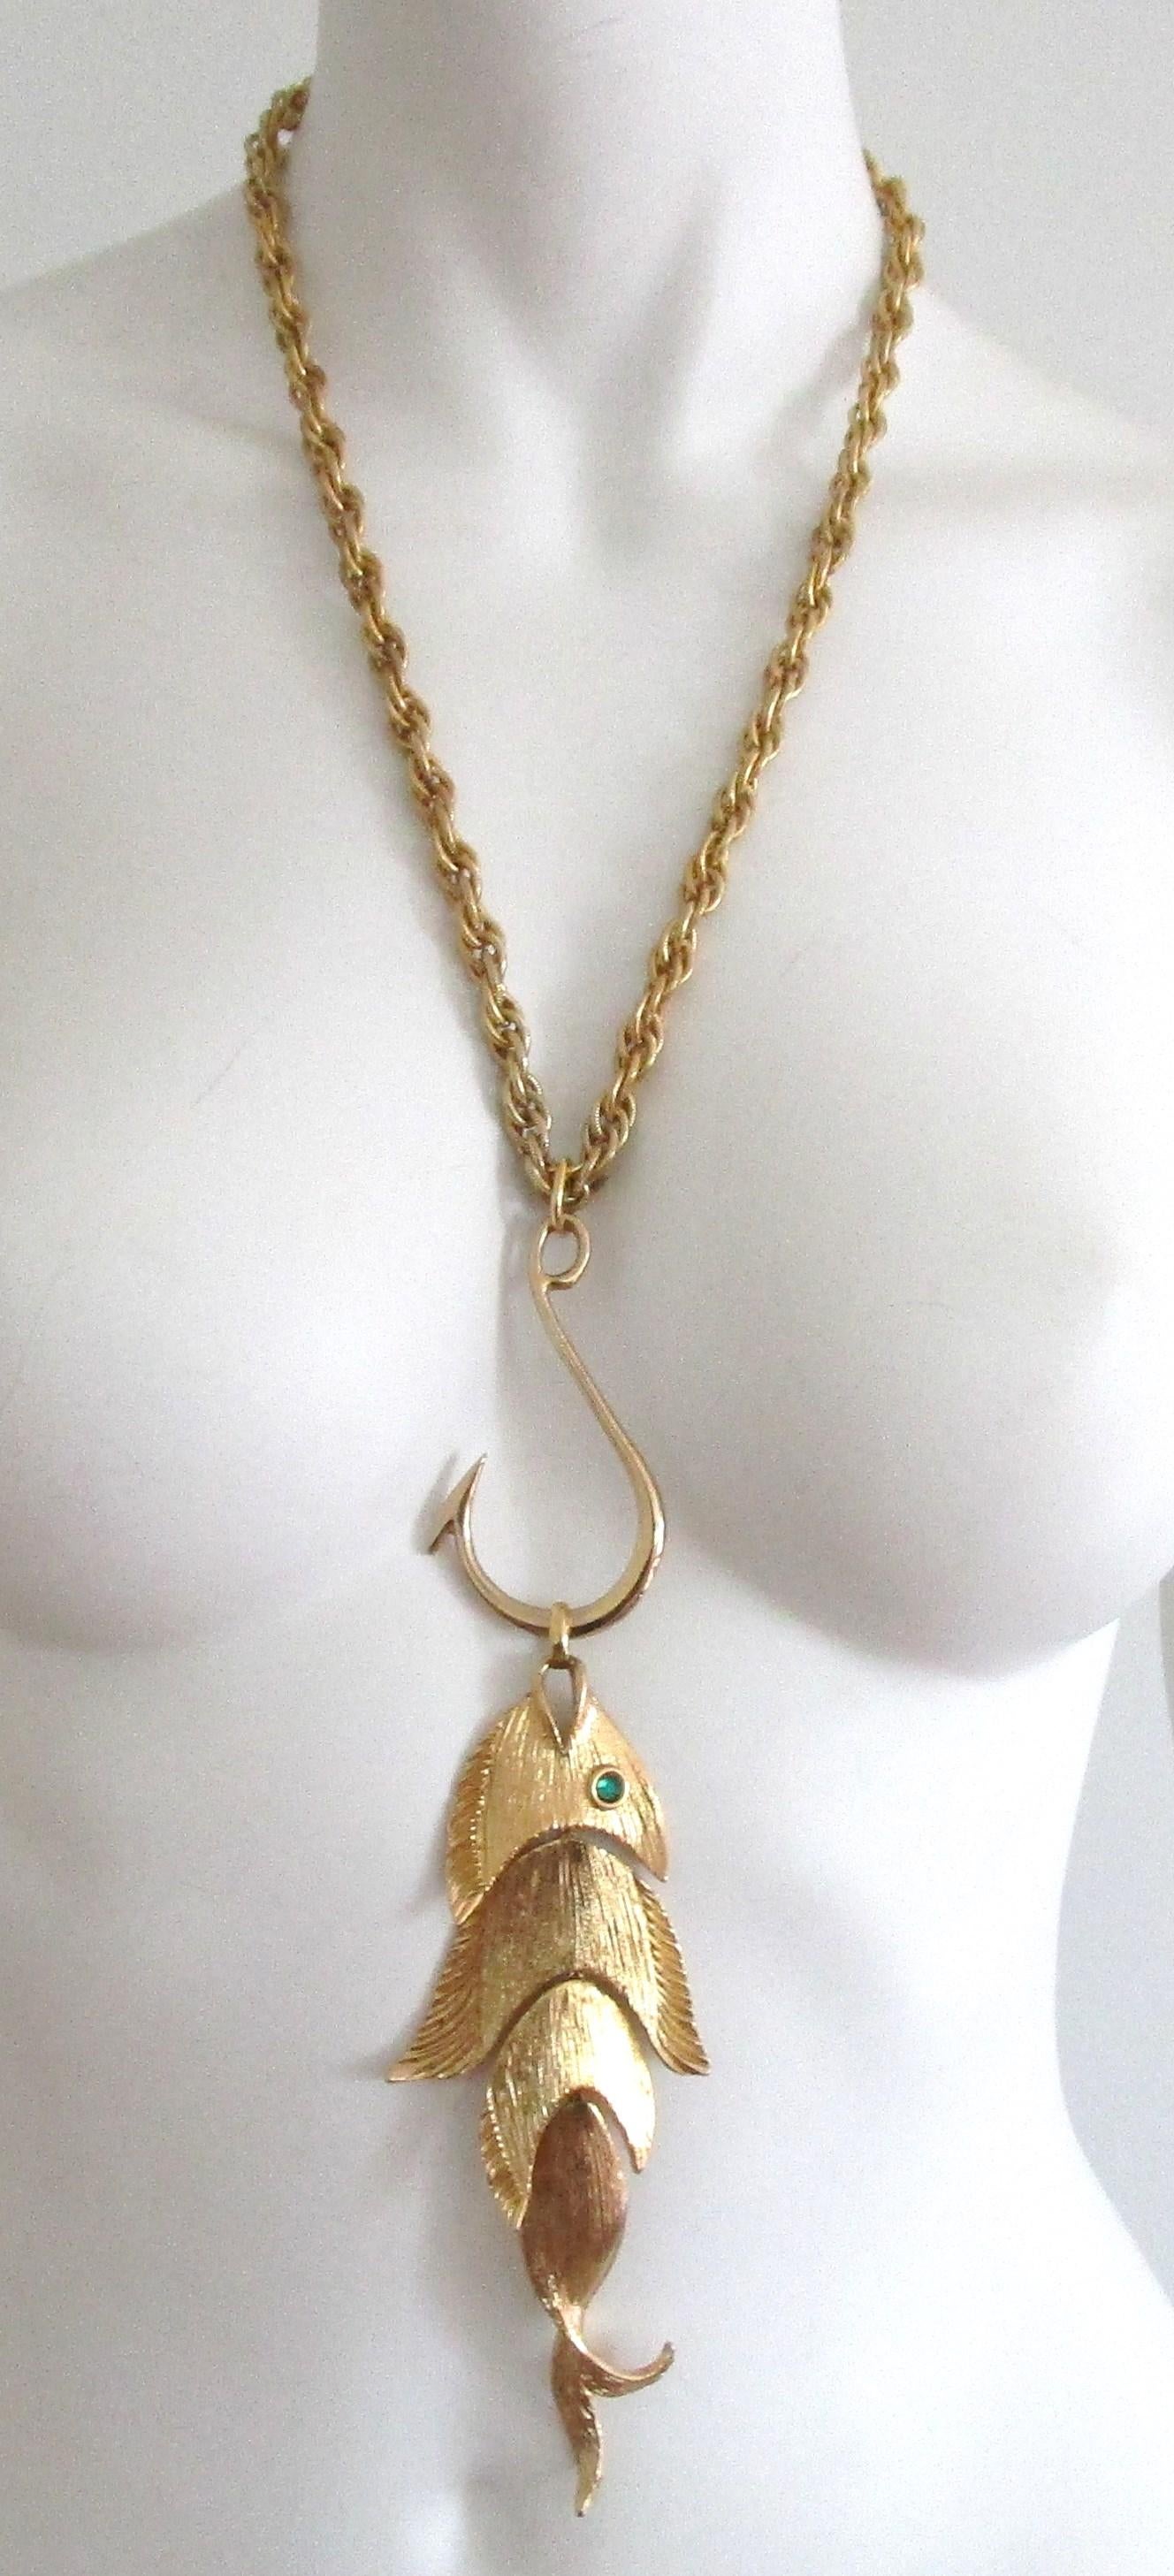 Fantastic Vintage Napier Articulated LARGE Fish Pendant Necklace. Hallmarked on the backside Napier. Brushed Gold Tone metal finish. Green faceted eye in the fish. Large chain measuring approximately 24.5 inches end to end. The Hook and Fish measure